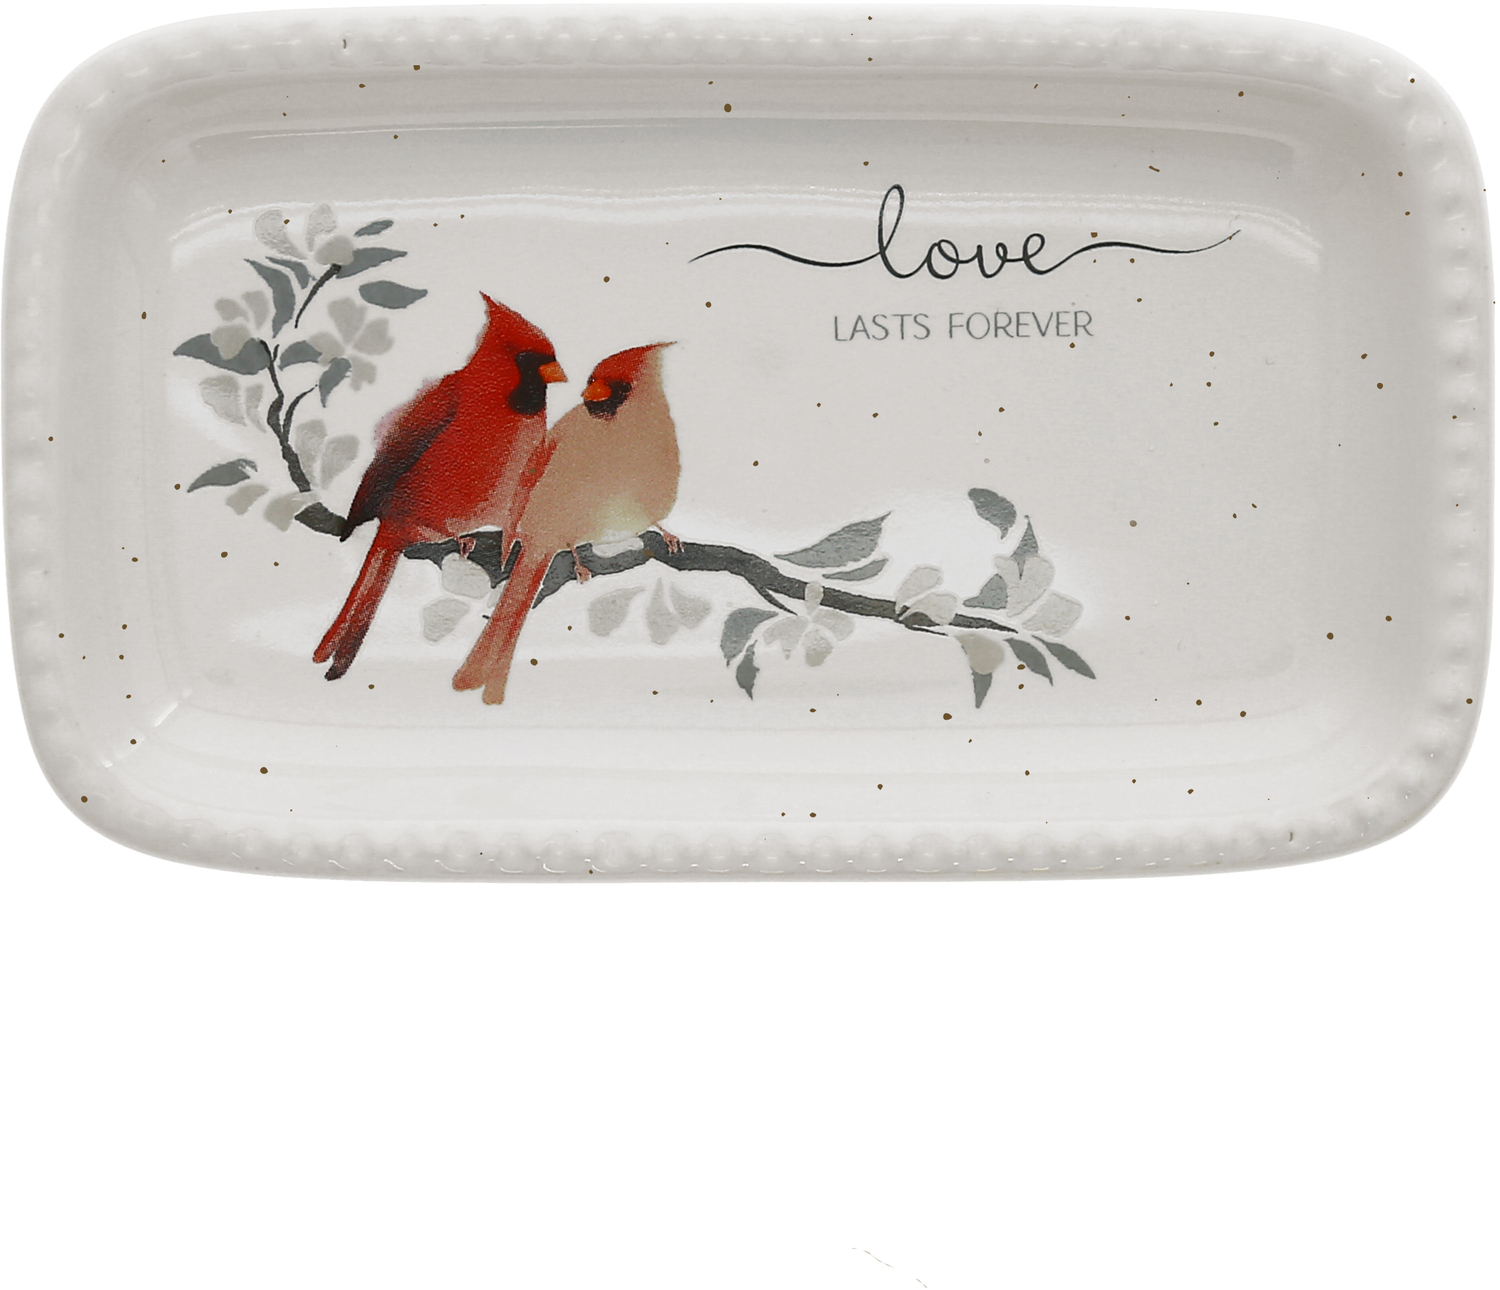 Love Lasts by Always by Your Side - Love Lasts - 5" x 3" Keepsake Dish